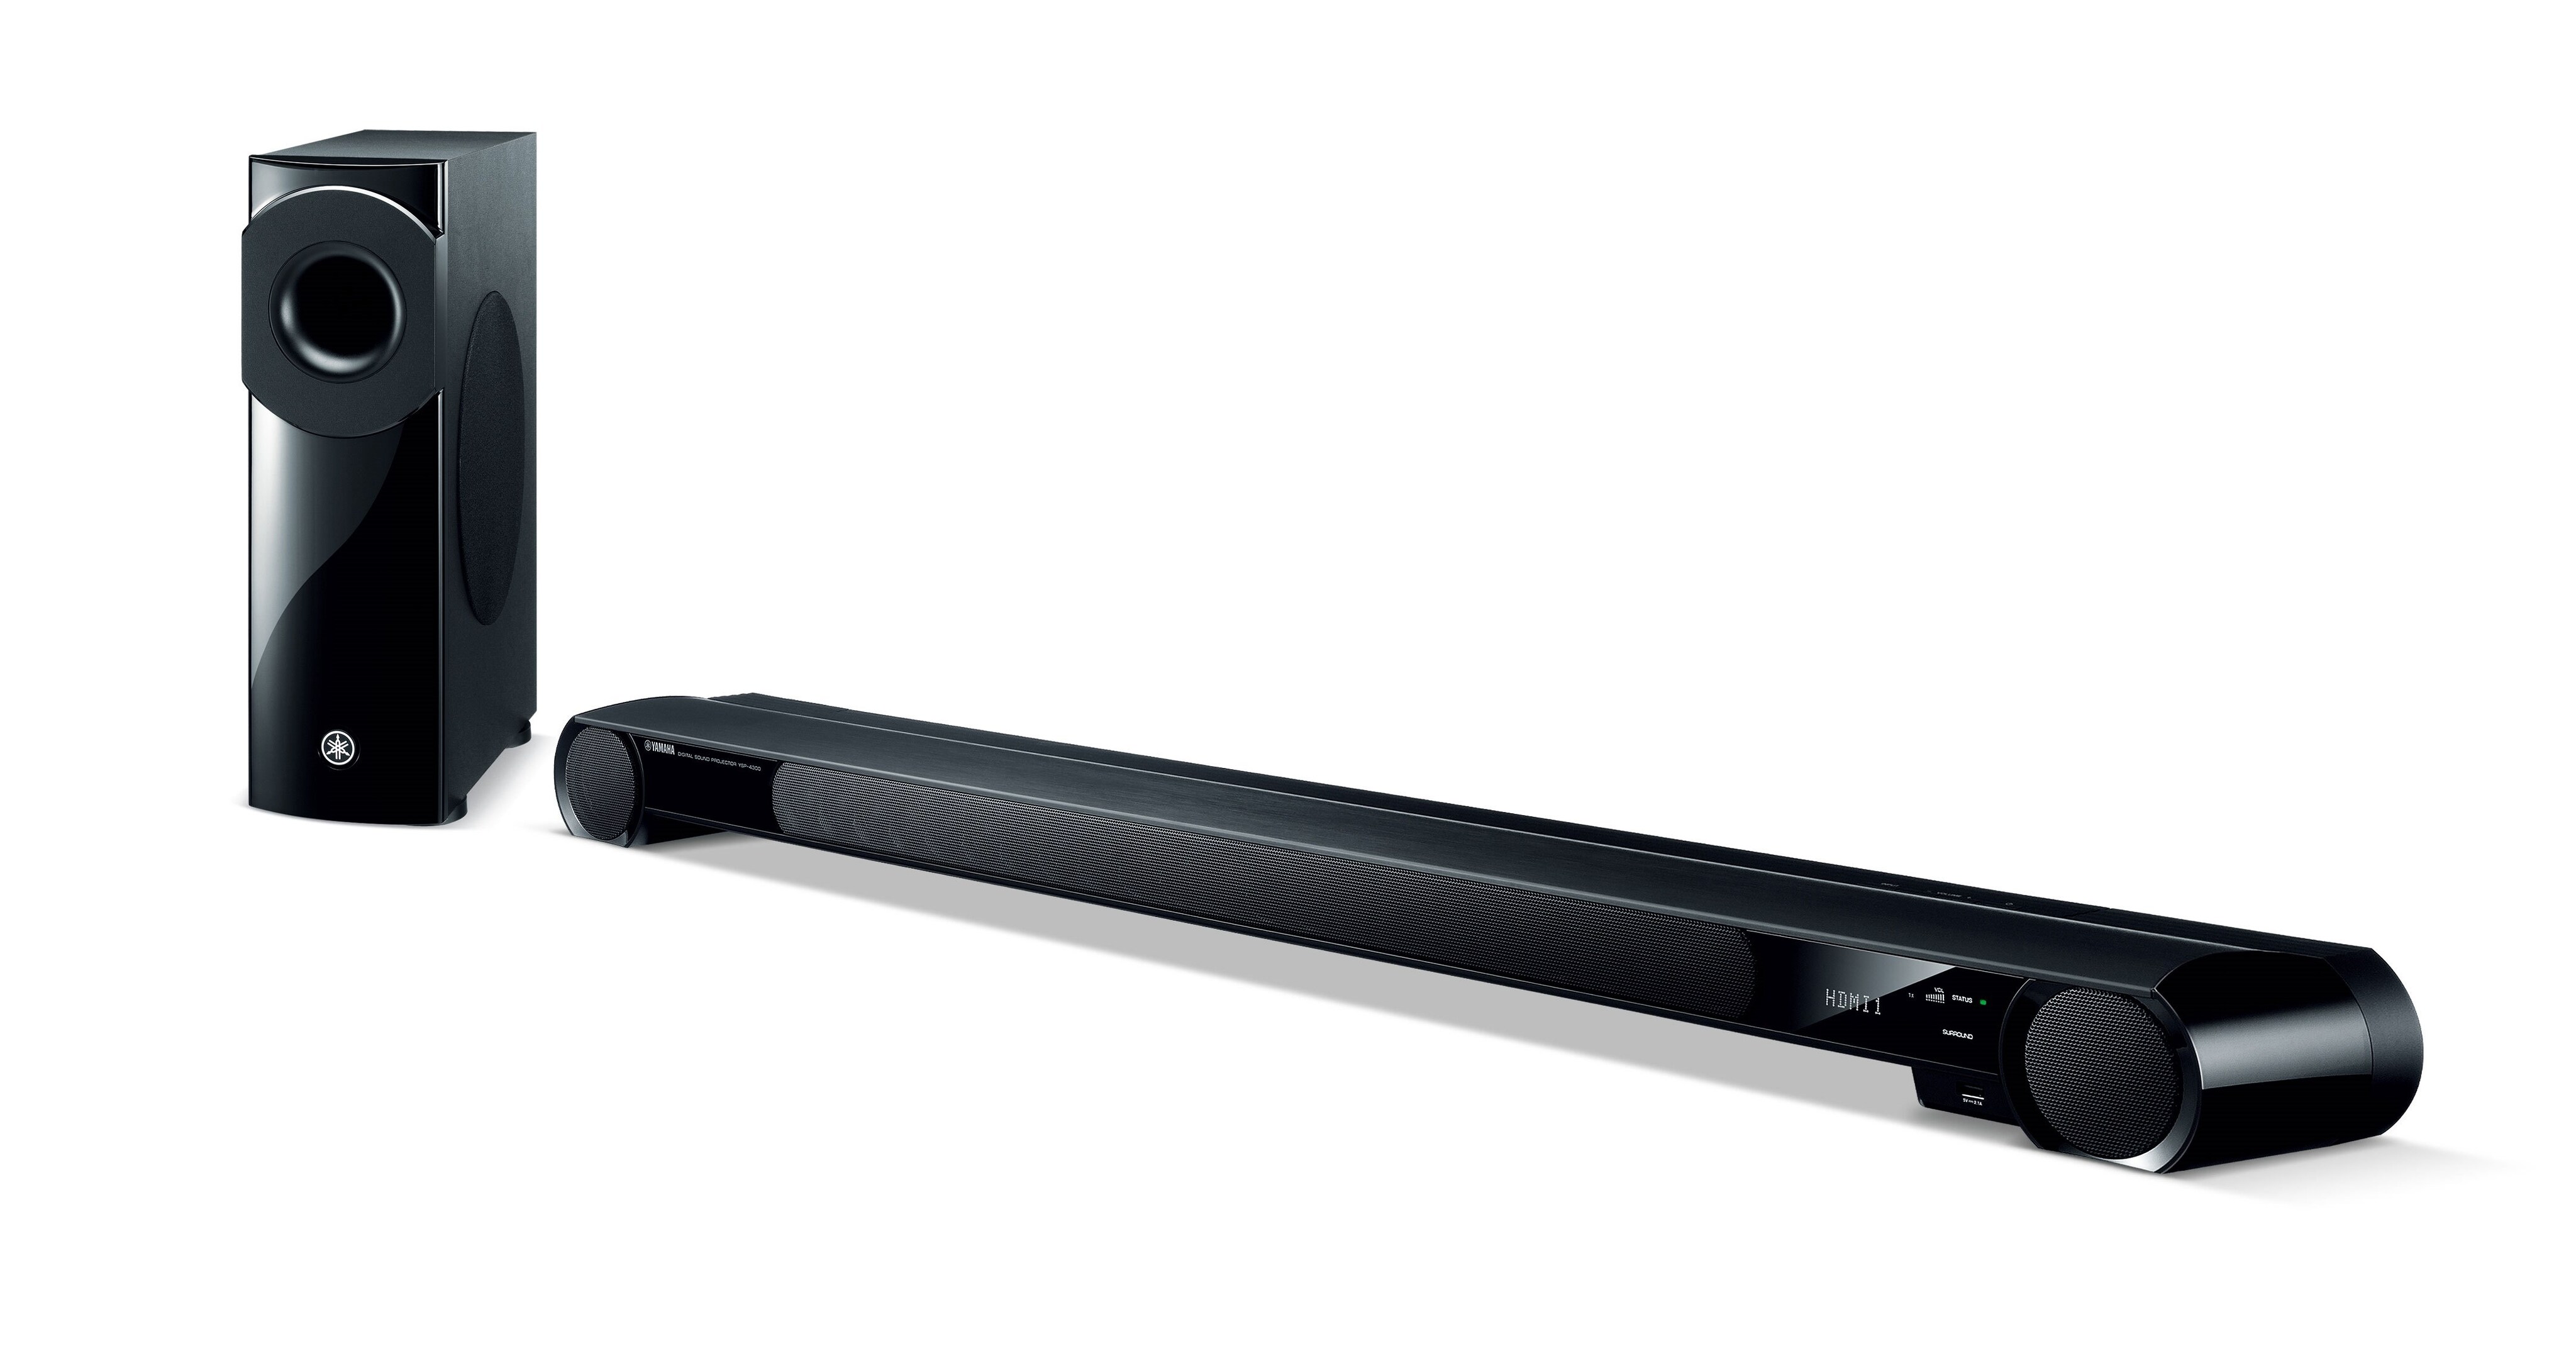 YSP-4300 - Overview - Sound Bar - Audio & Visual - Products 